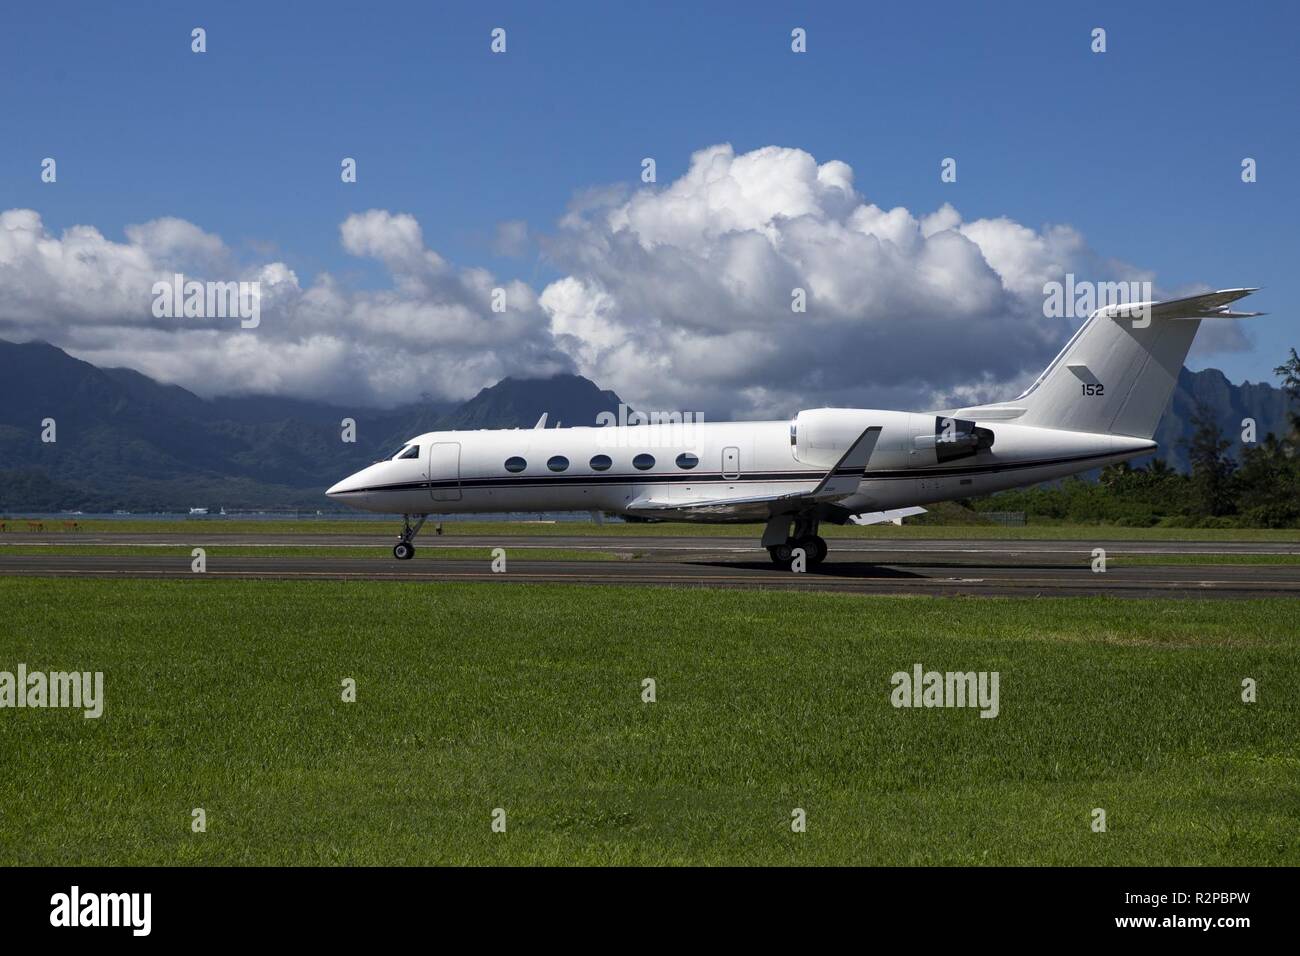 A C-20G Gulfstream aircraft arrives aboard Marine Corps Air Station Kaneohe Bay after being transferred to United States Marine Corps control from the United States Navy, Marine Corps Base Hawaii, Oct. 31, 2018. The new C-20G aircraft was obtained to replace the only other C-20G Gulfstream in the Marine Corps, the iconic 'Grey Ghost' while it undergoes heavy maintenance. Stock Photo